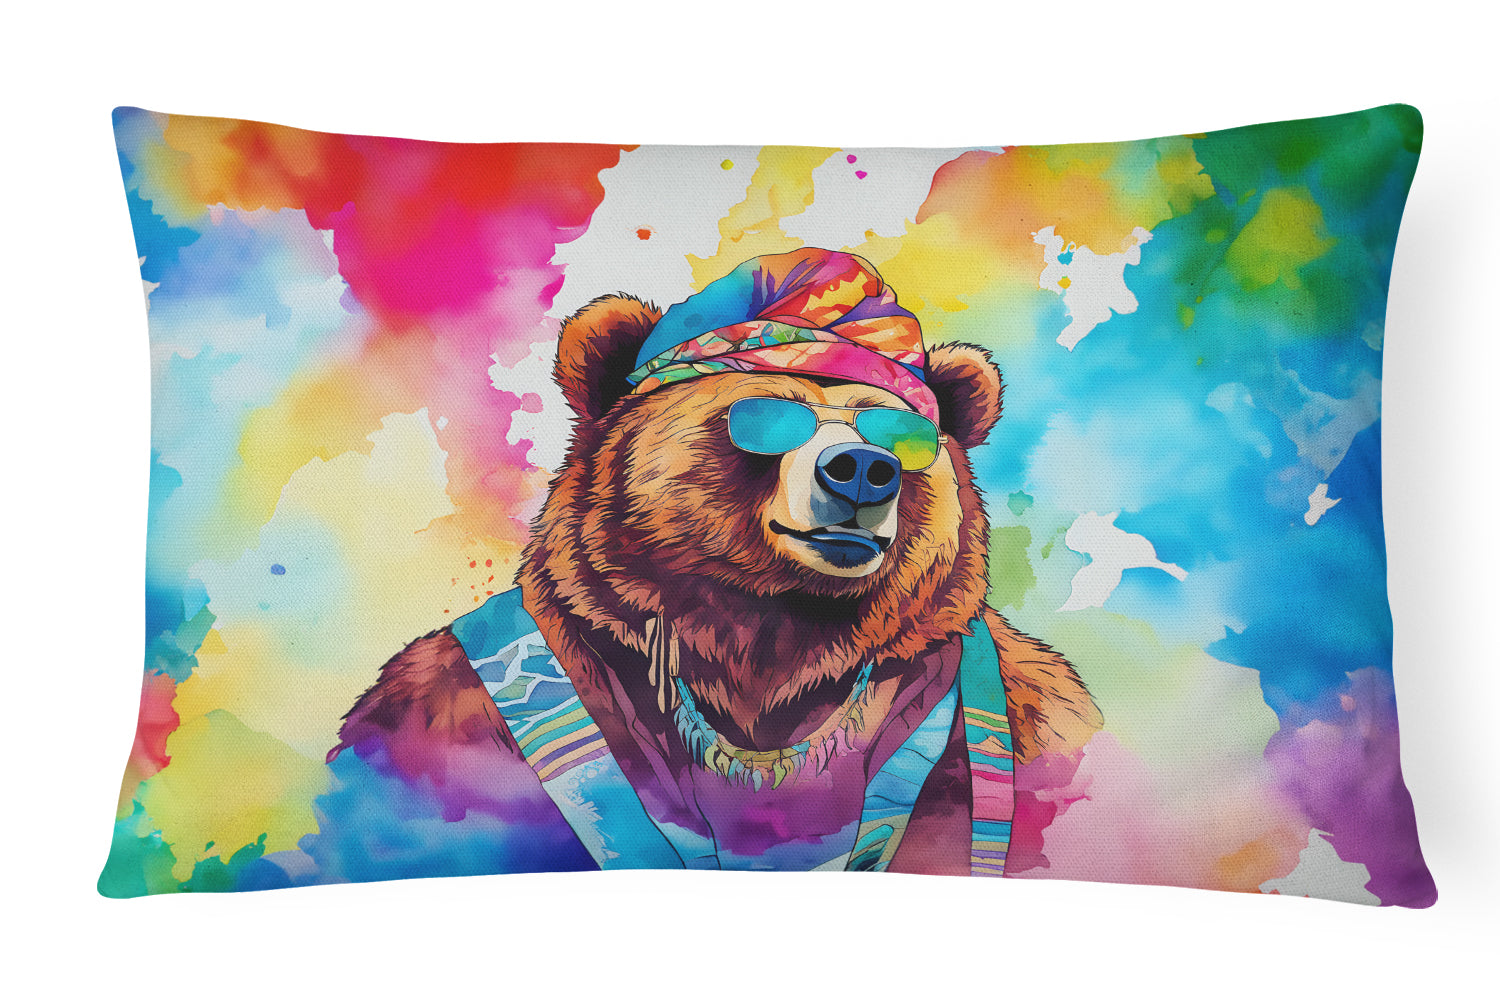 Buy this Hippie Animal Grizzly Bear Throw Pillow